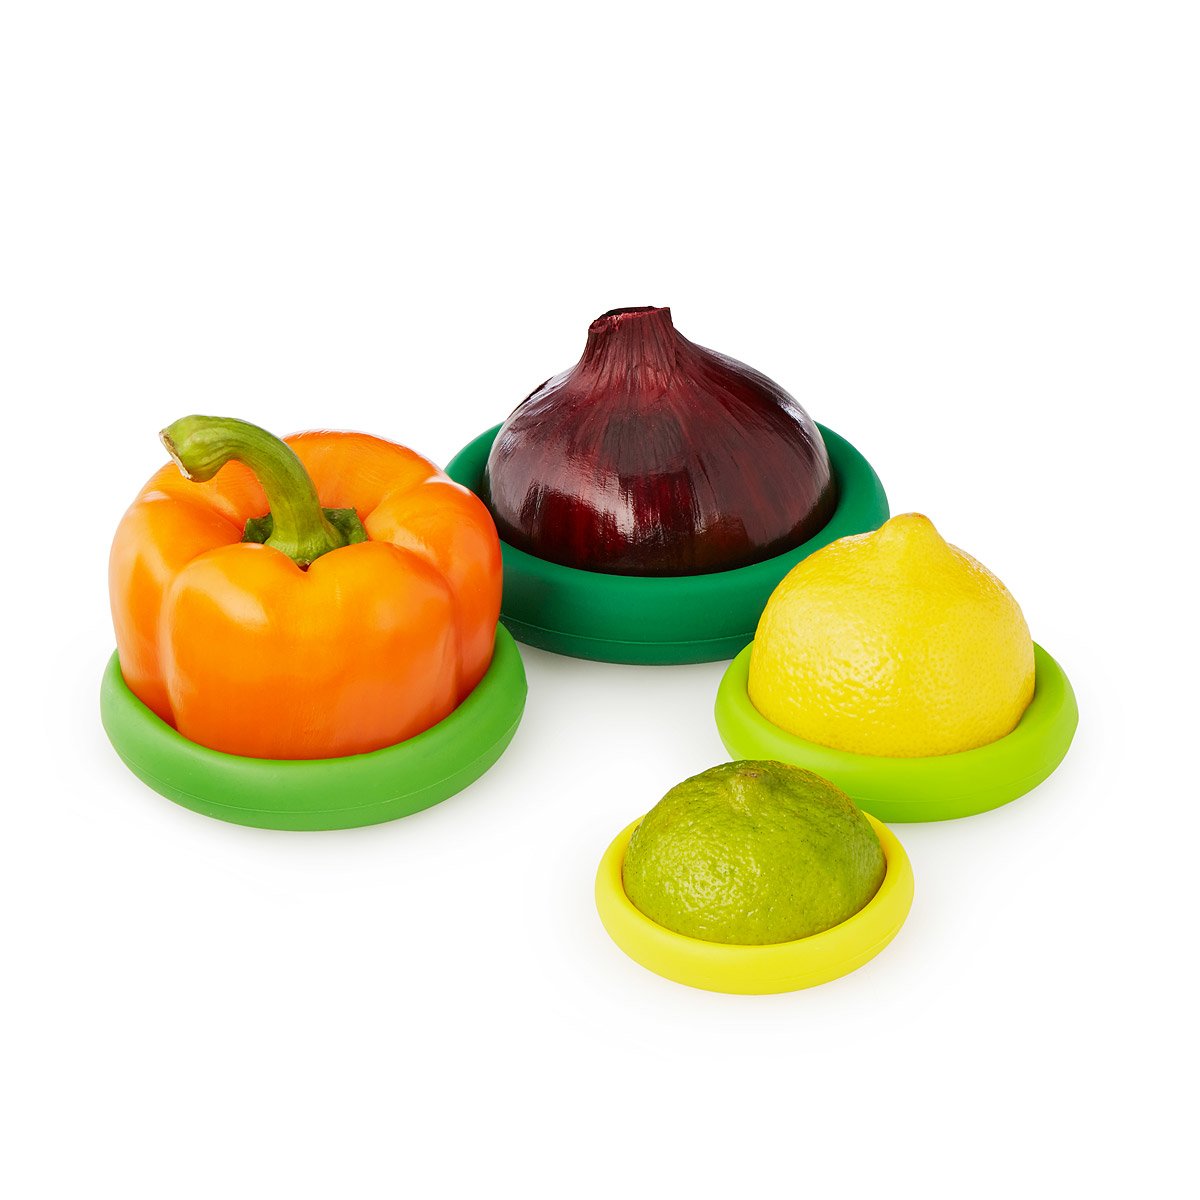 Silicone Food Savers & FREE Silicone Food Wrap, Fruits And Vegetable Huggers,Set of 4,Reusable,Durable And Expandable To Fit Various Sizes And Shapes of Containers